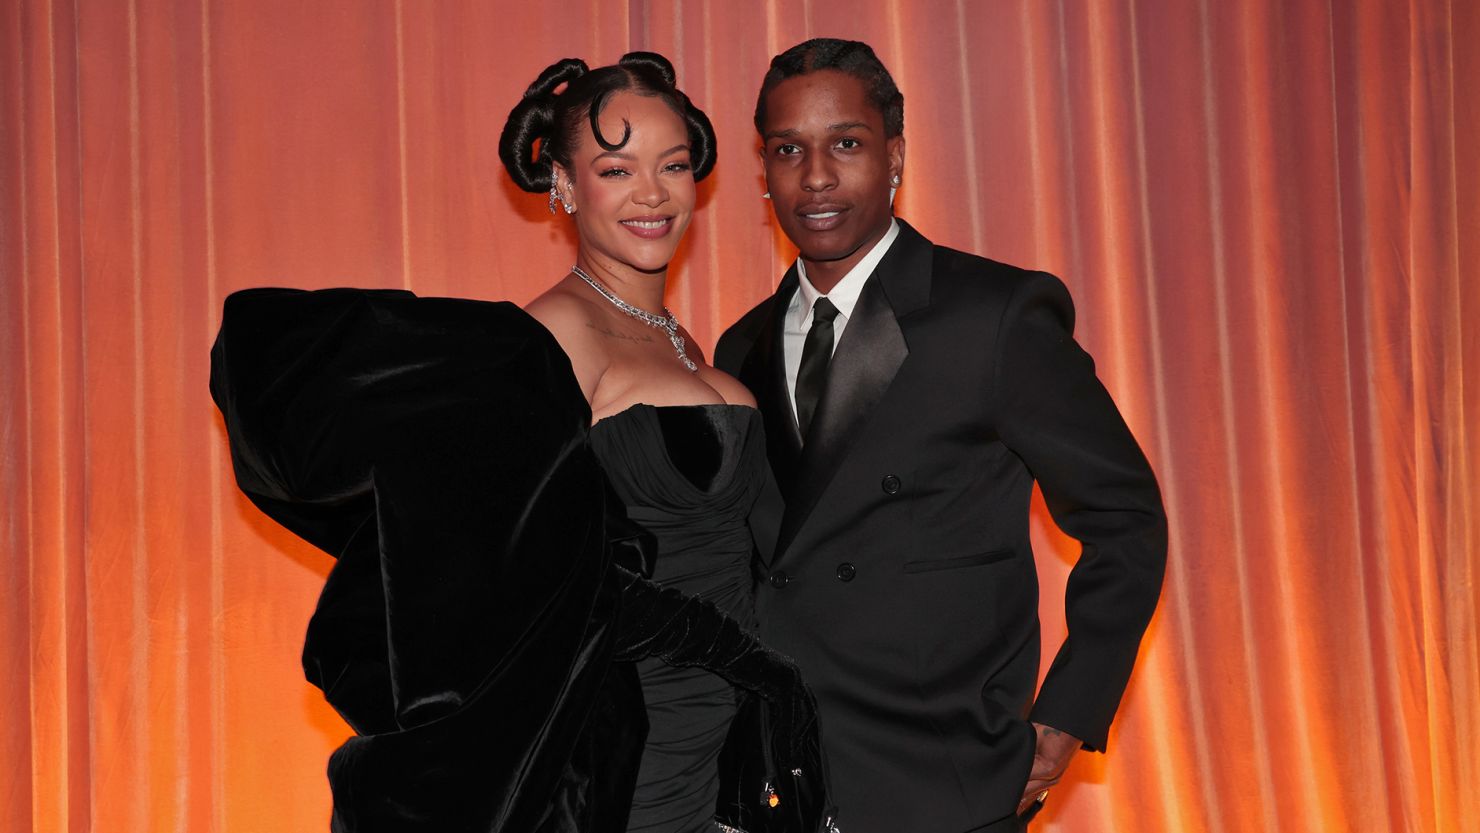 Rihanna and A$AP Rocky attend the 80th Annual Golden Globe Awards held at the Beverly Hilton Hotel on January 10, 2023 in Beverly Hills, California.